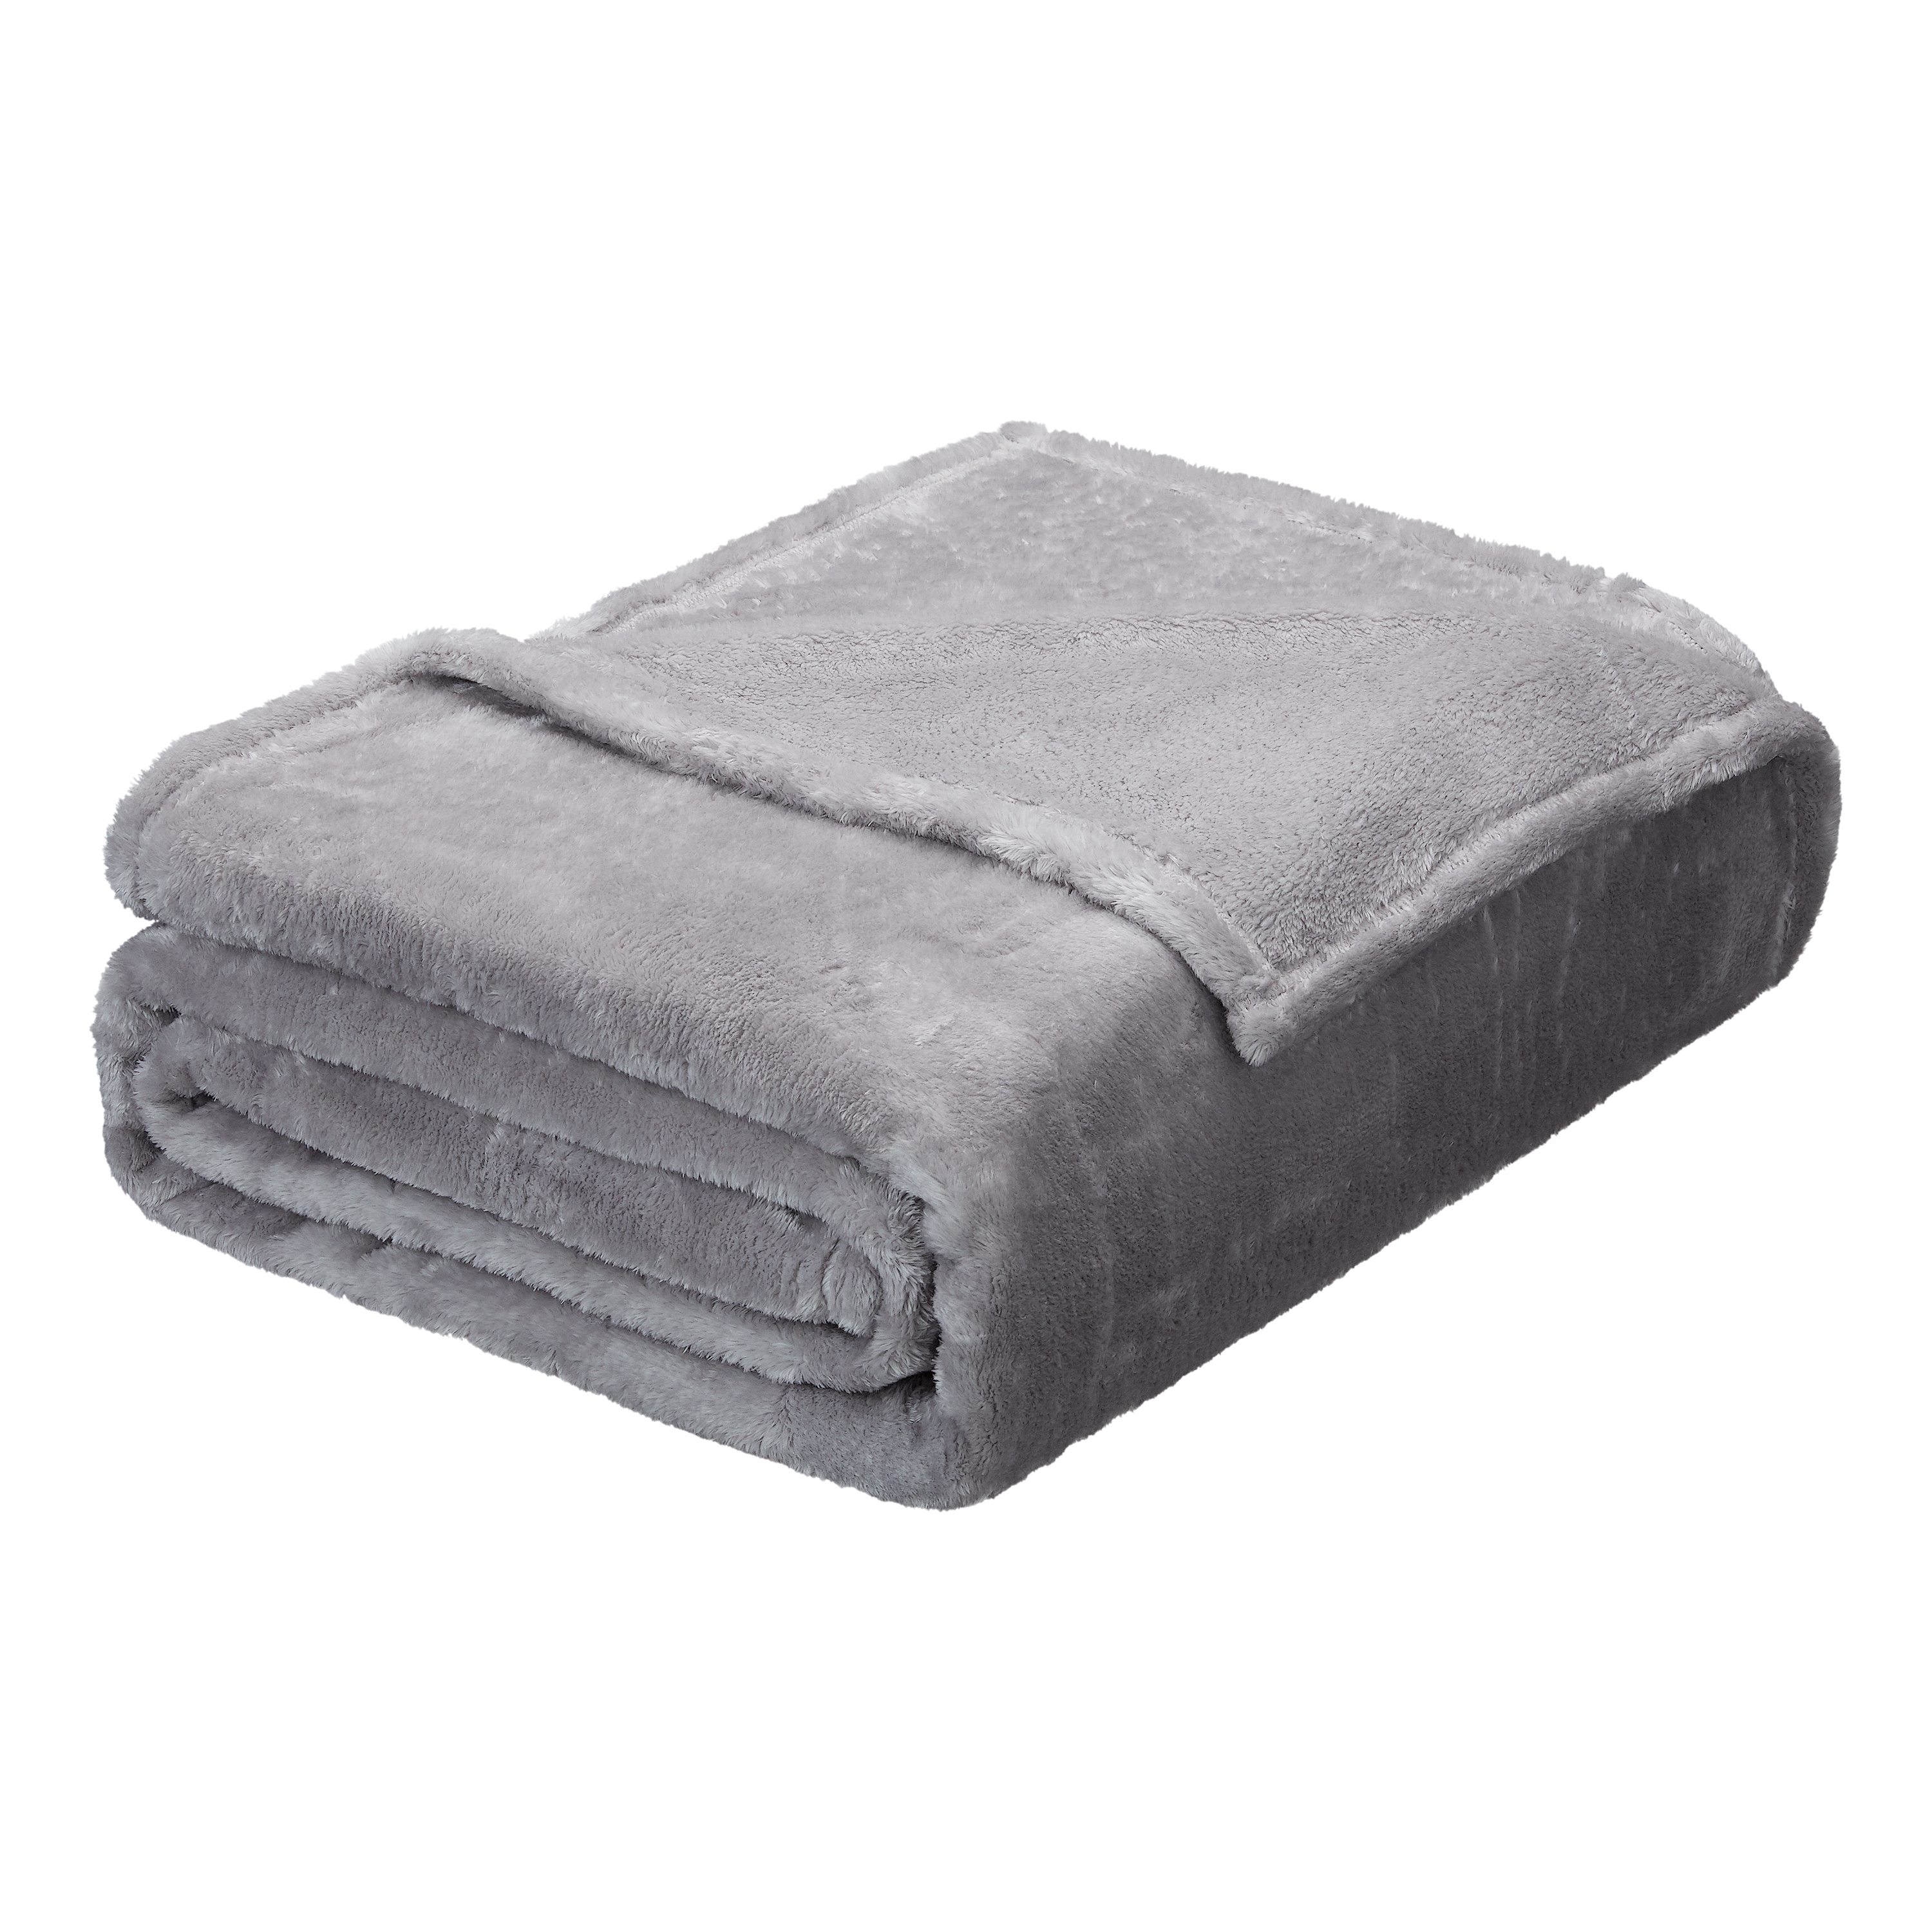 Better Homes & Gardens Luxe Plush Blanket, Full/Queen Soft Silver - image 1 of 4